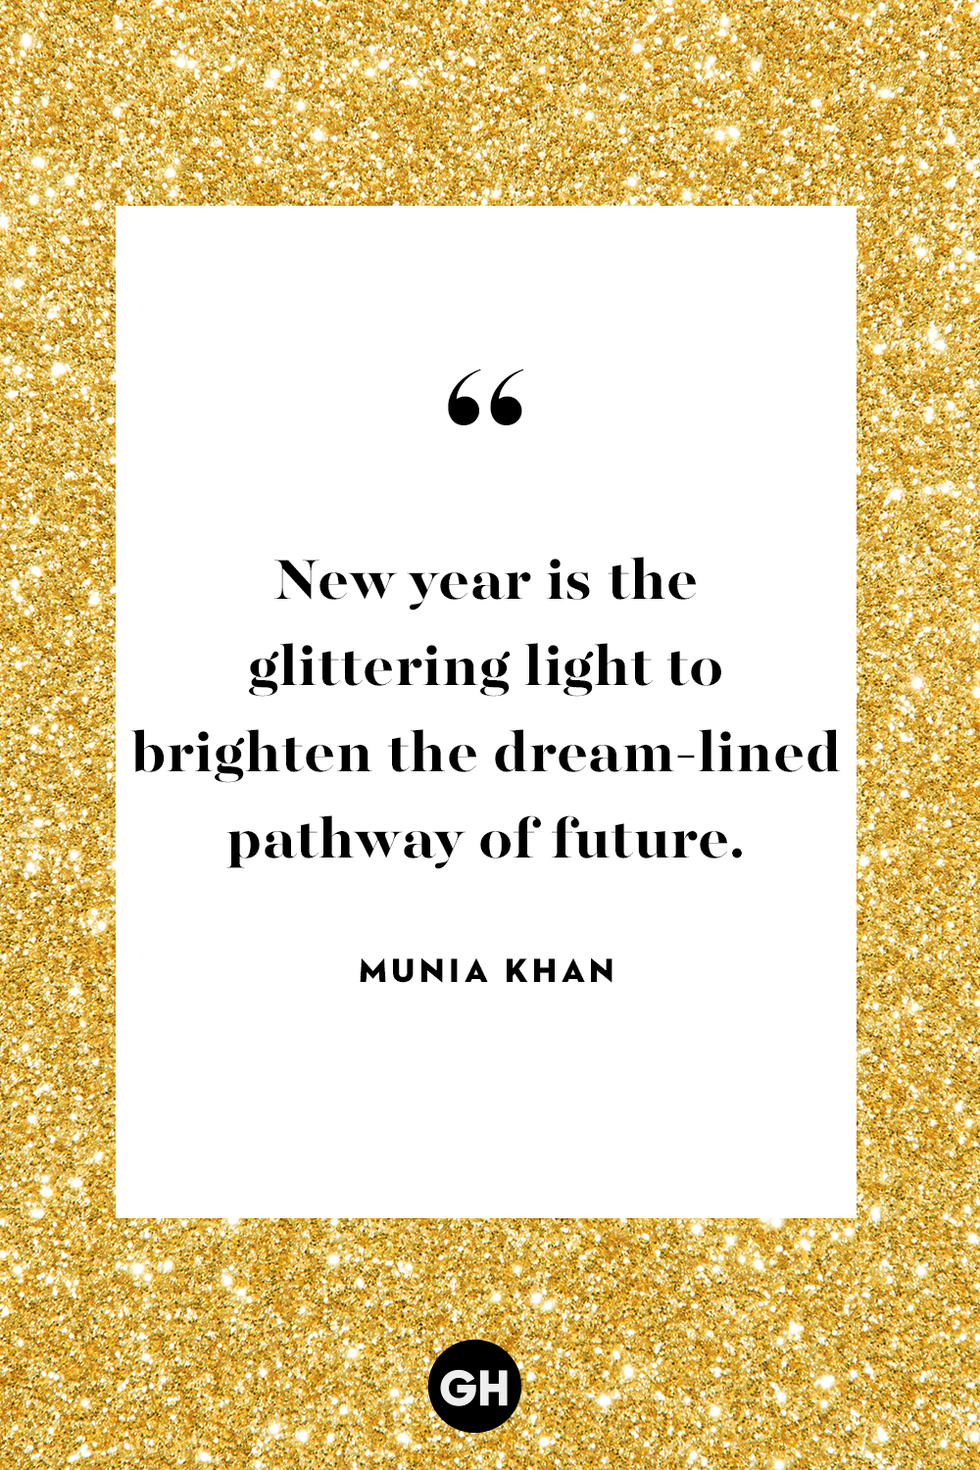 new year quote by munia khan